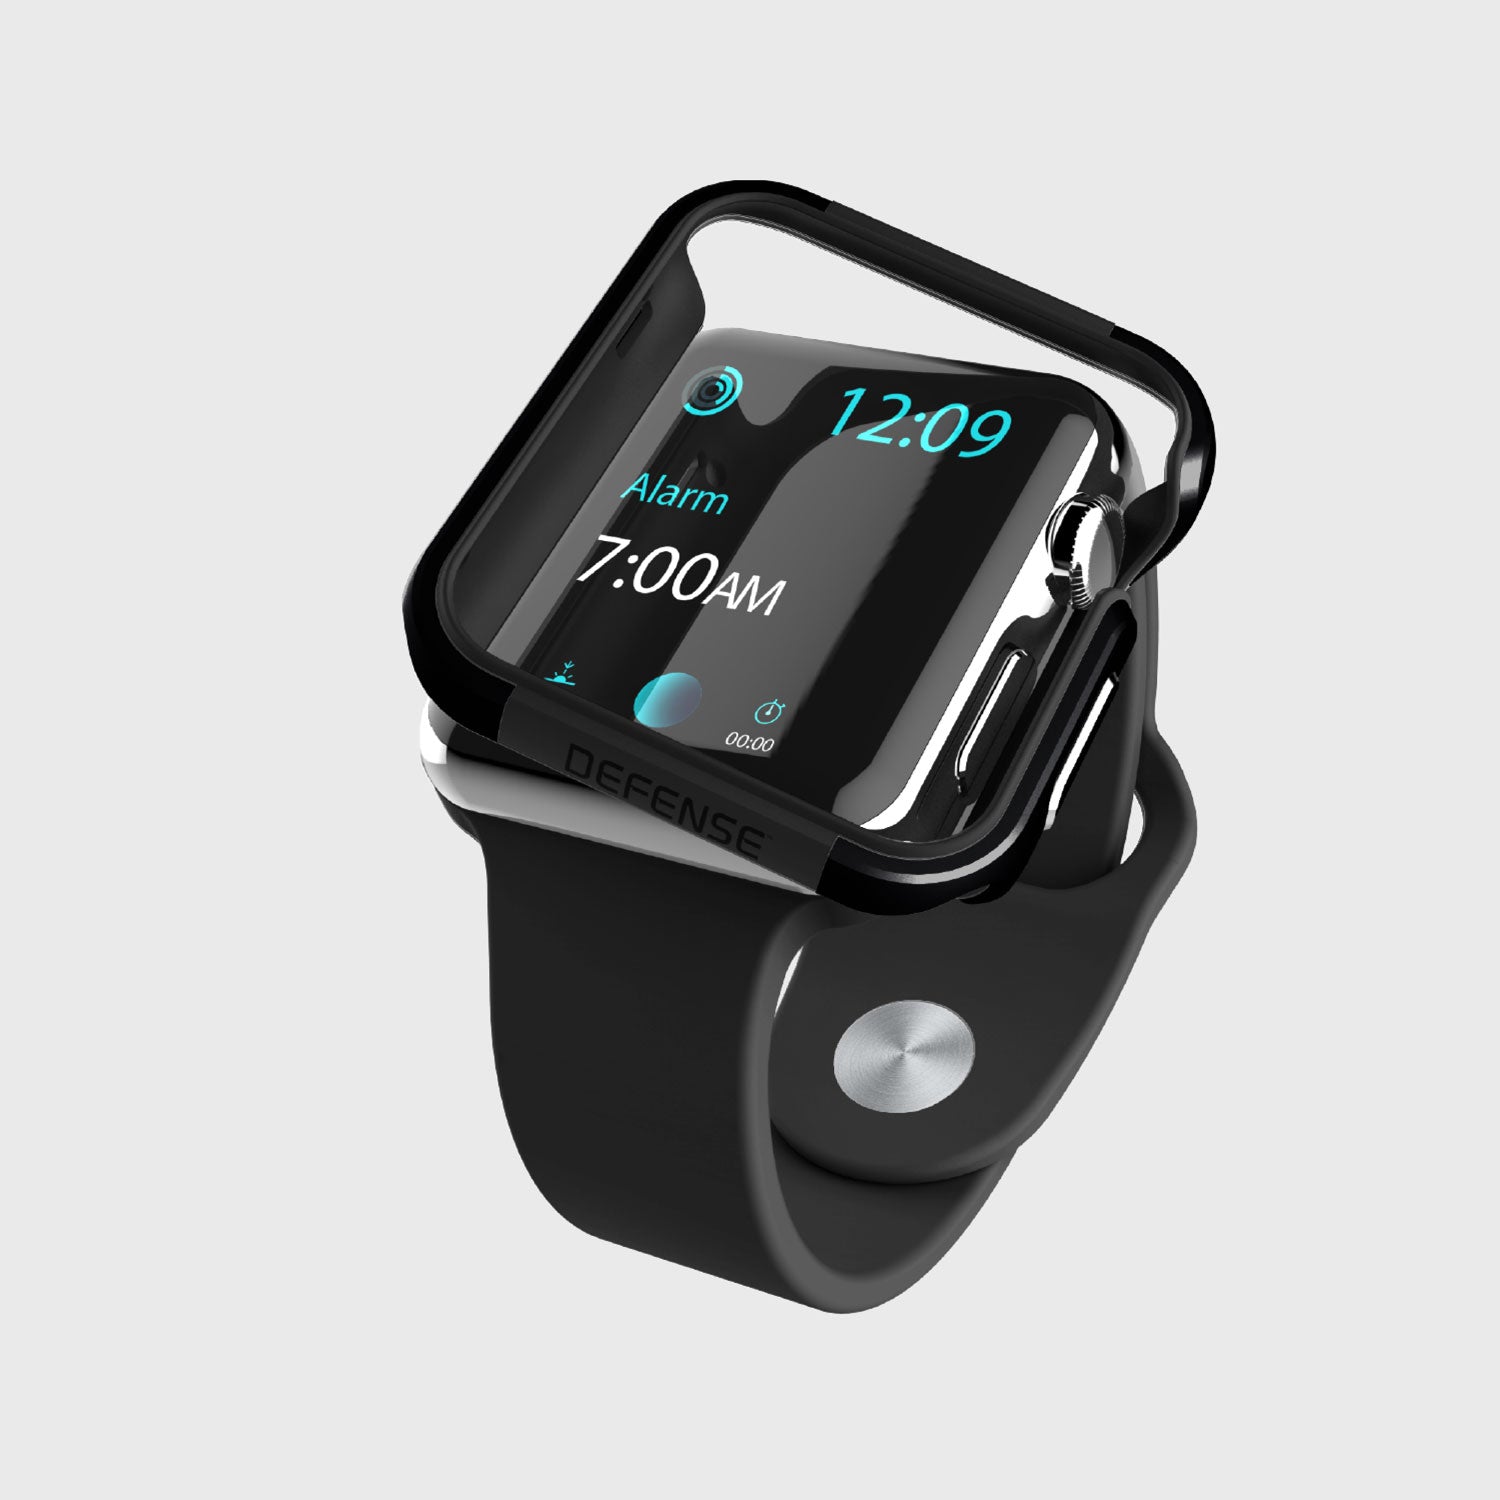 A black Apple Watch with a screen on it and a machined anodized aluminum Raptic EDGE bumper that protects it.